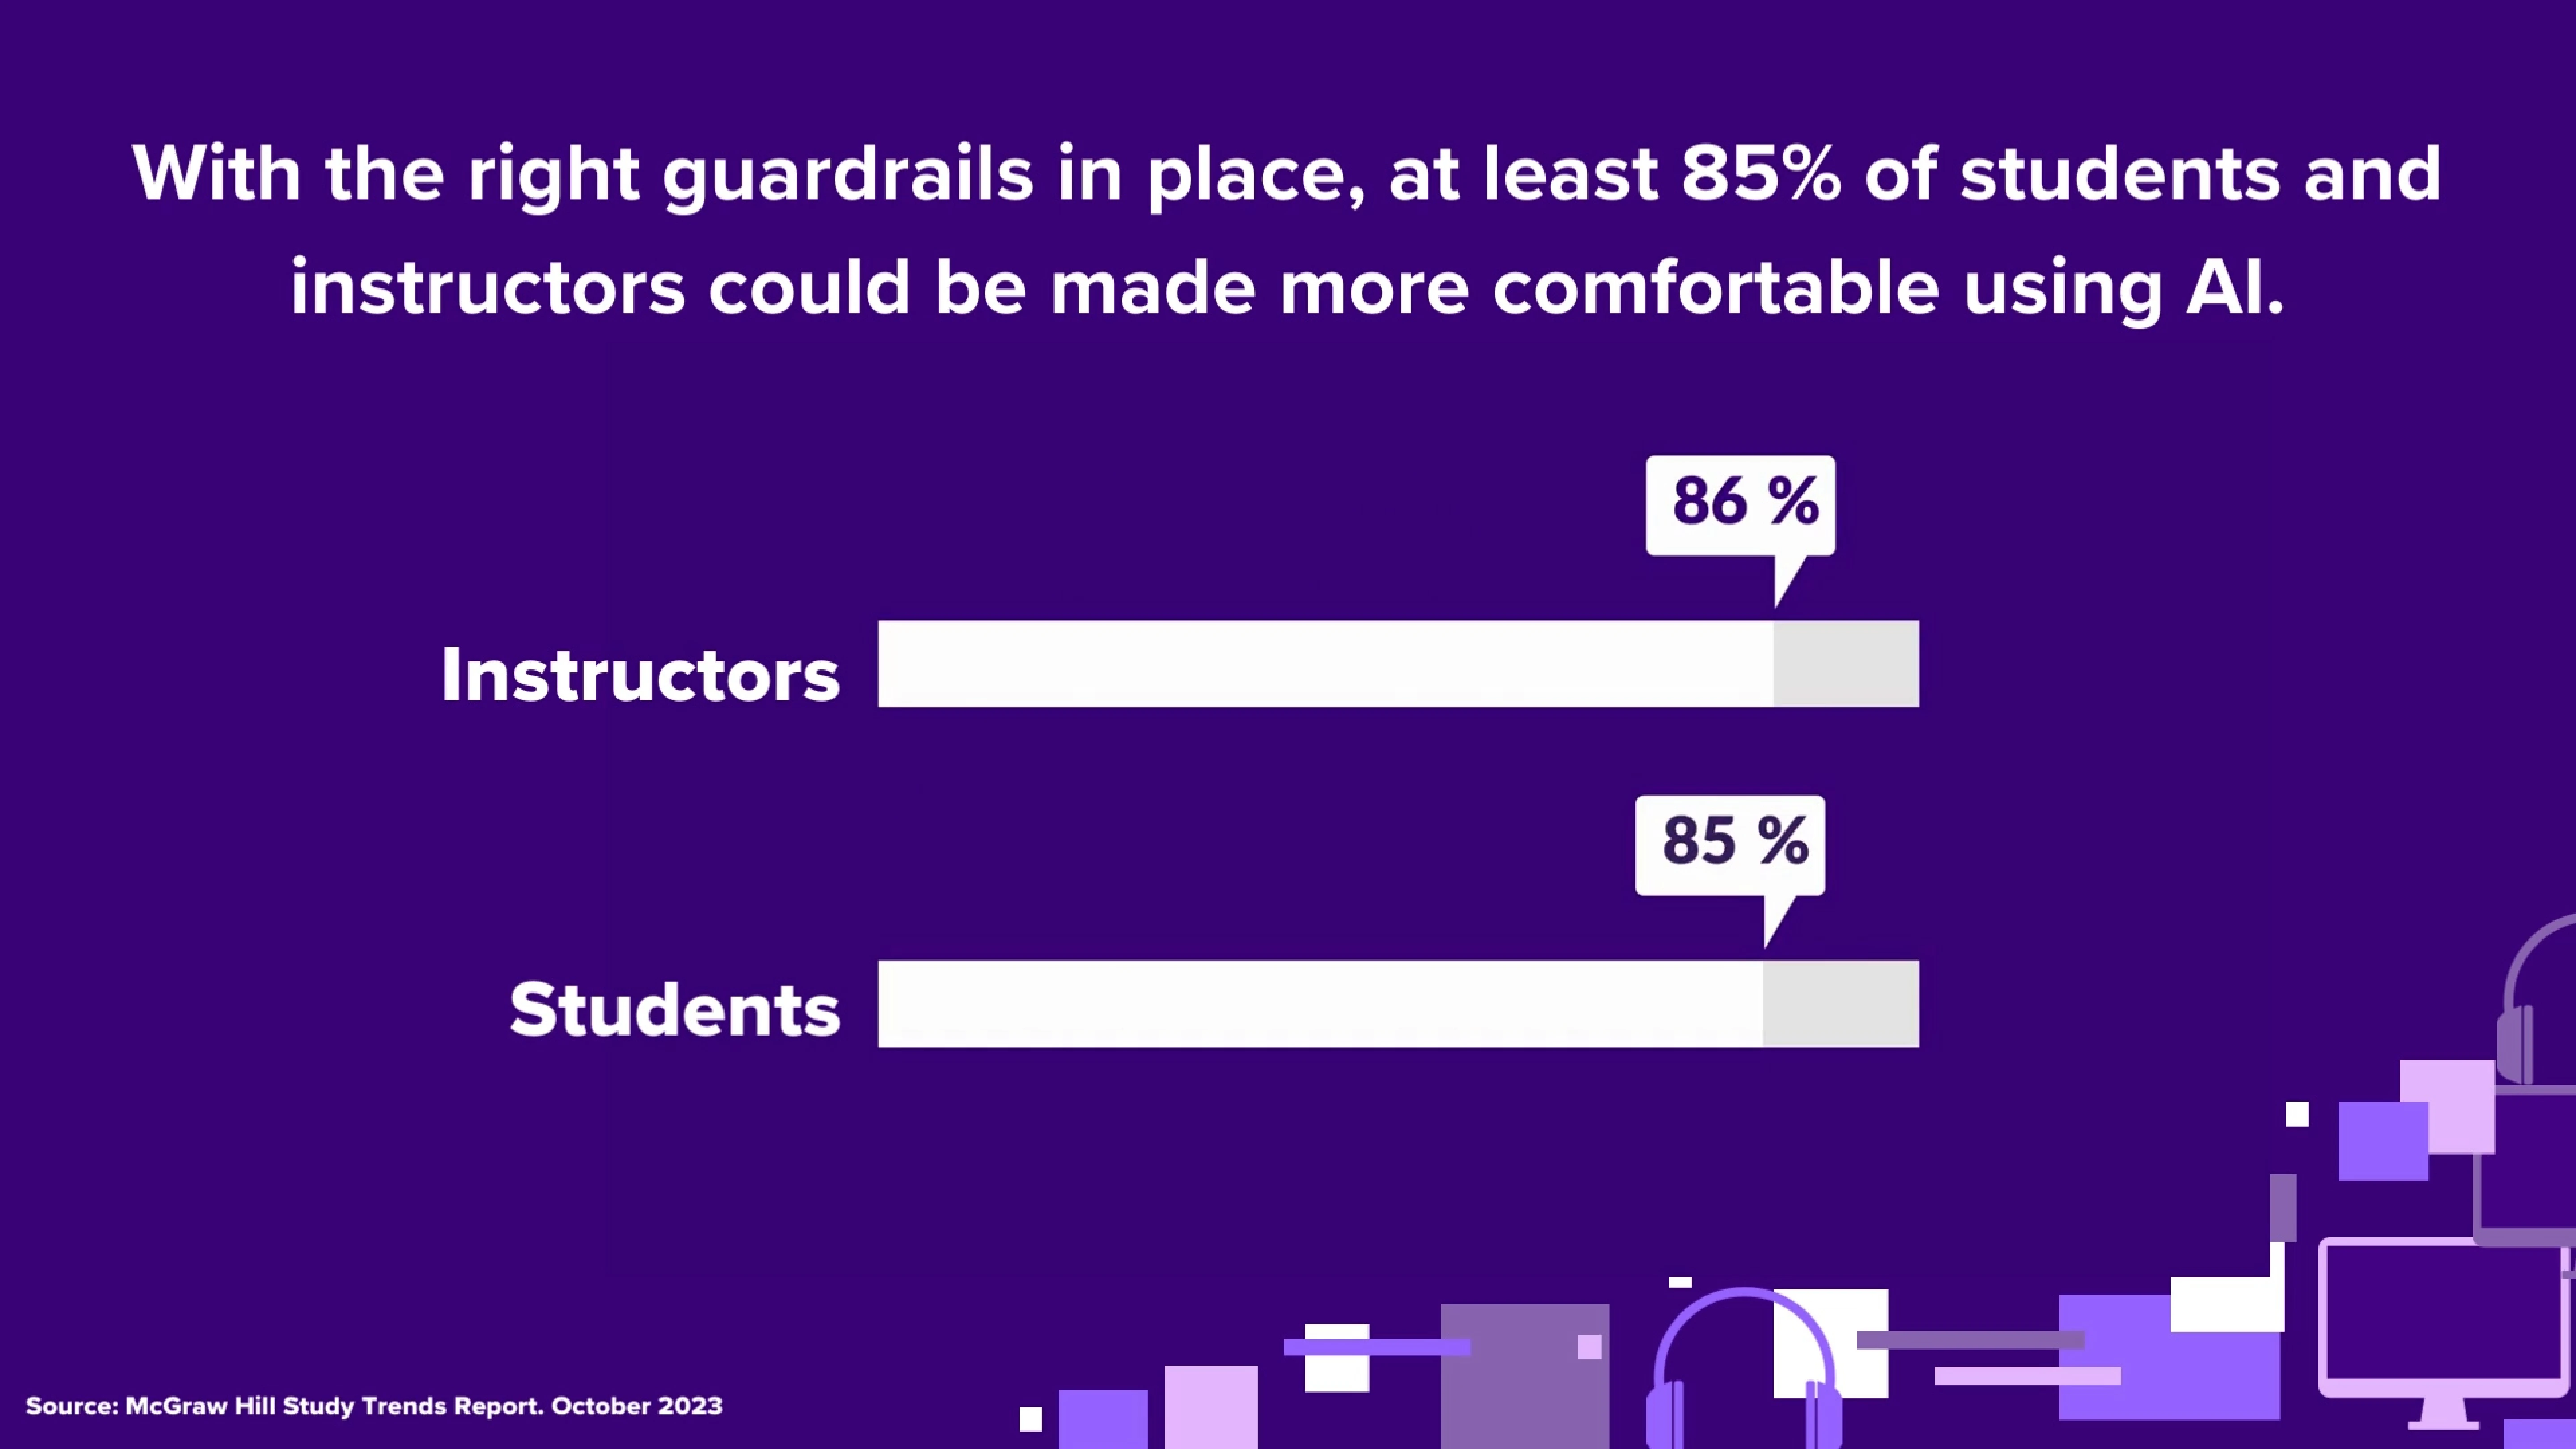 with the right guardrails in place at least 85% of students and instructors could be made more comfortable using AI.